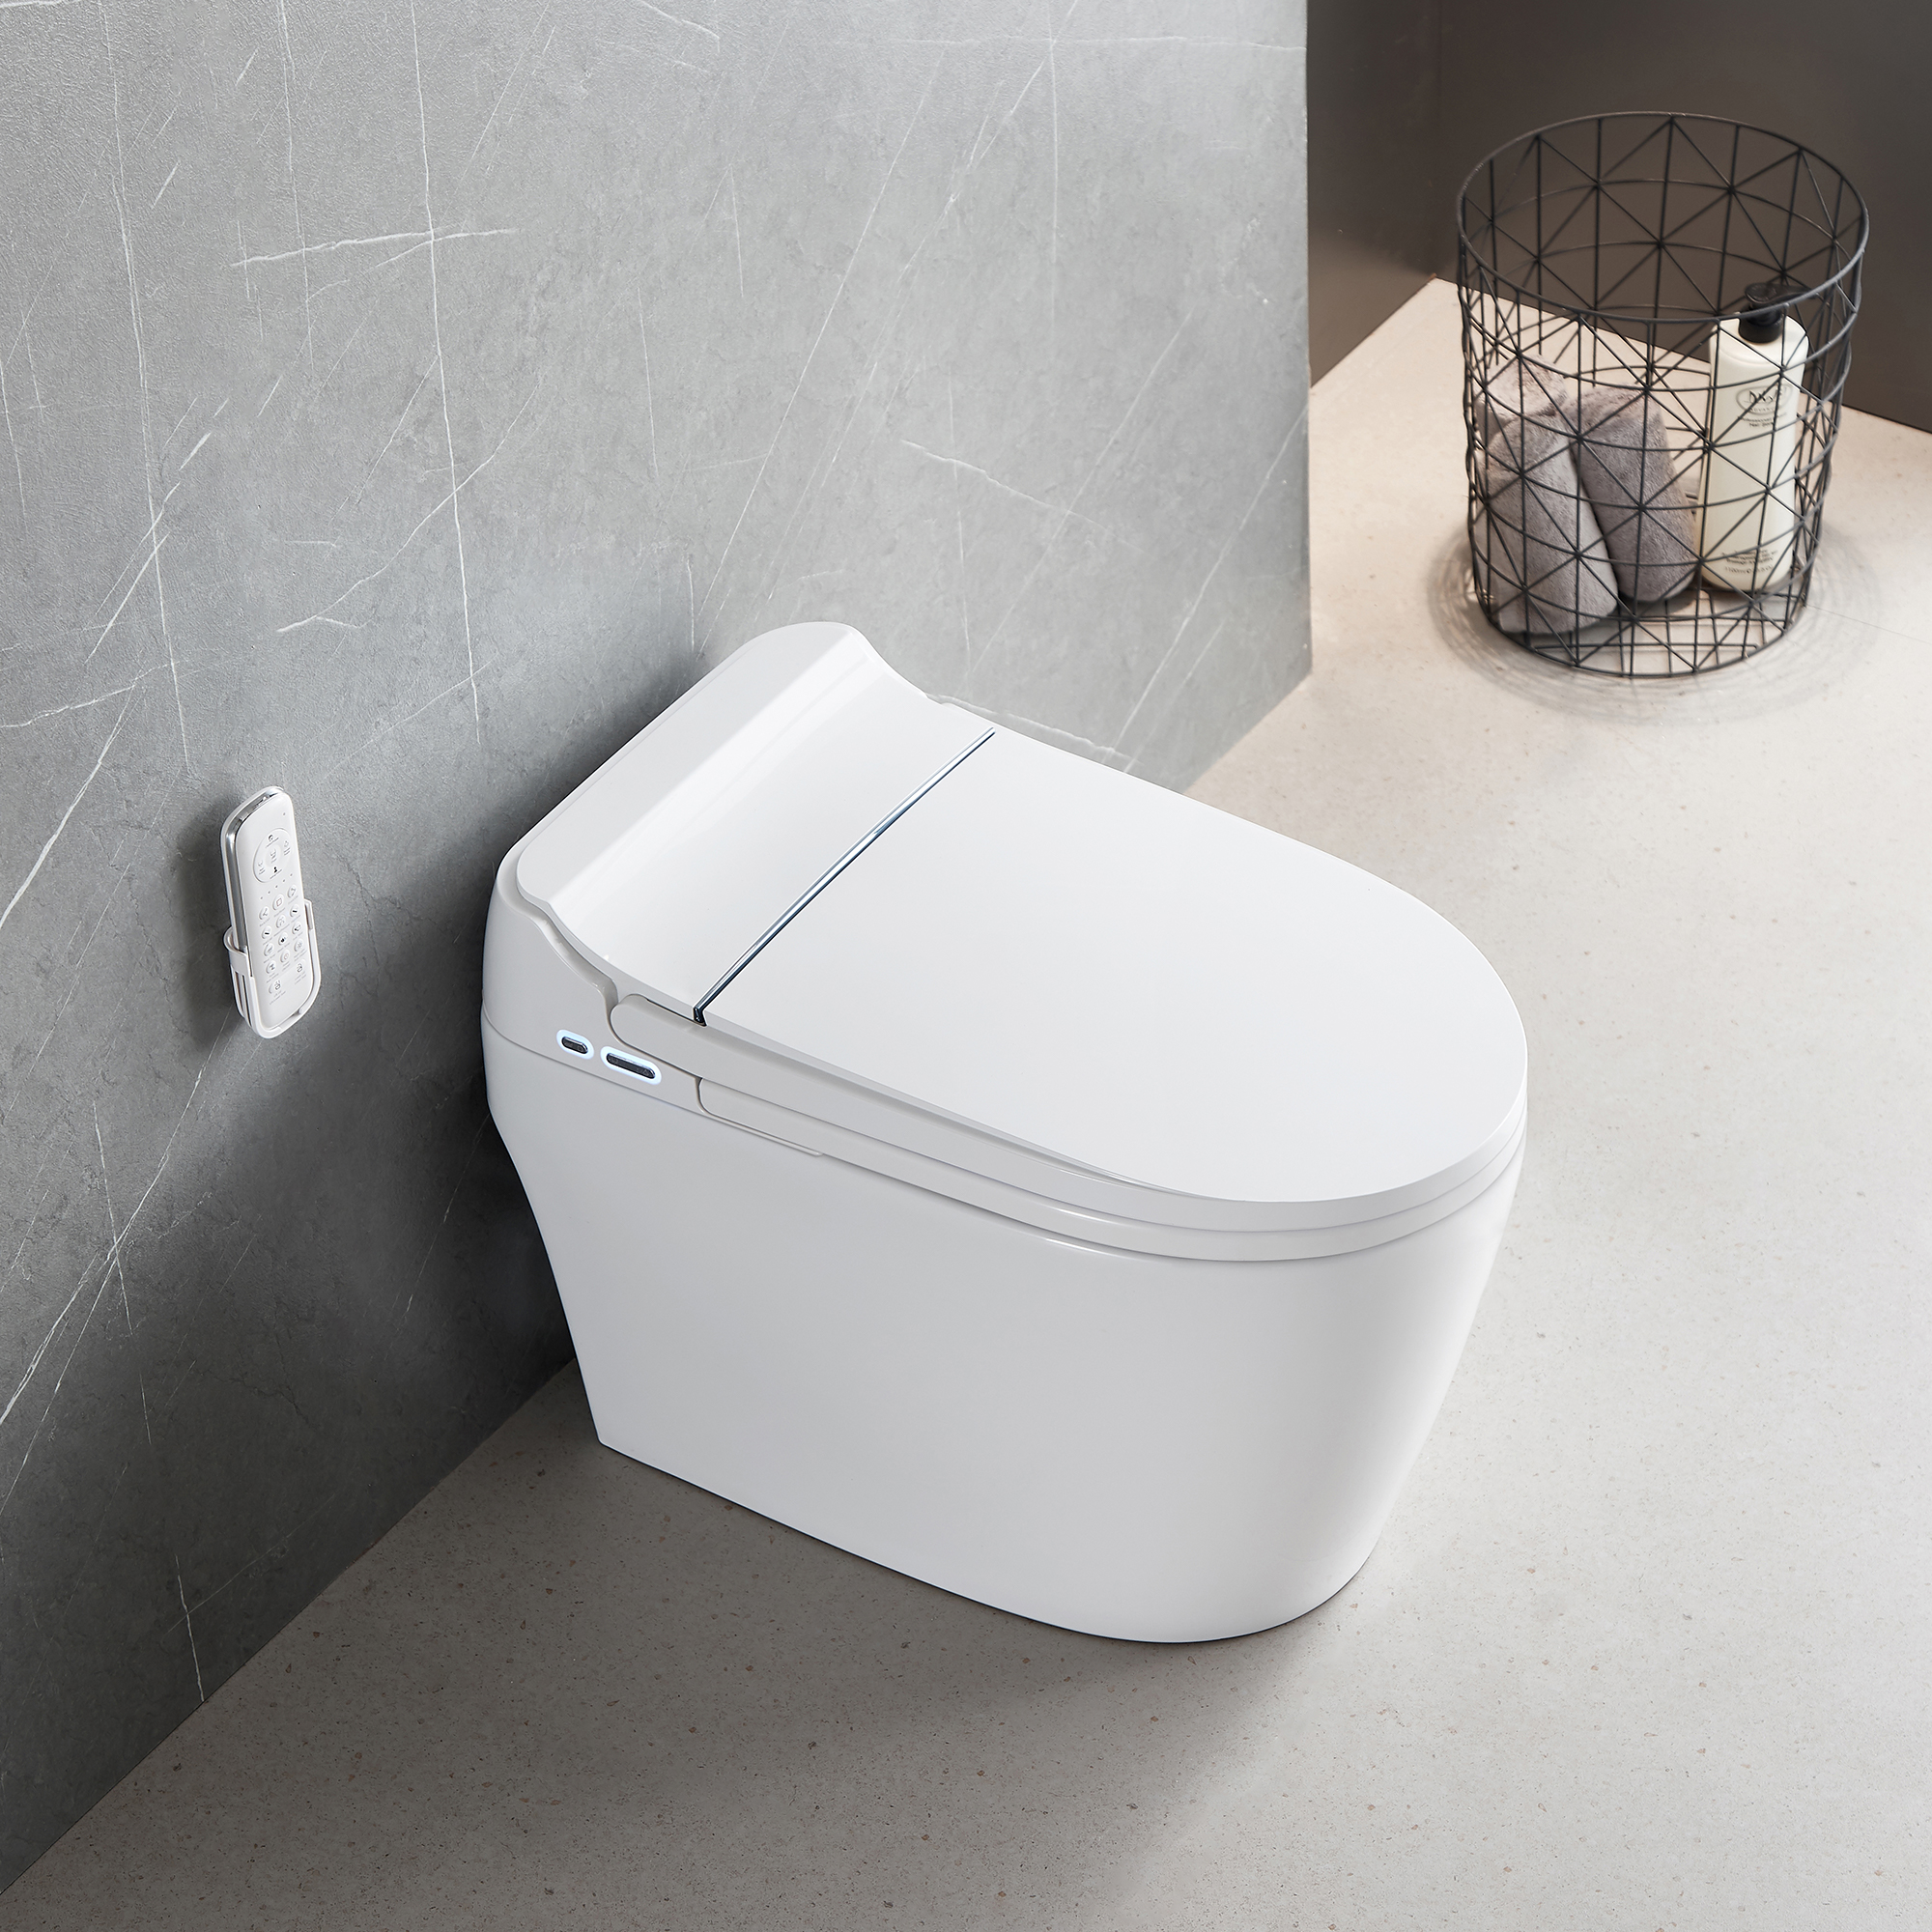 Teekyooly 2023 one-piece Smart Toilet with Advance Bidet And Soft Closing Seat, Auto Dual Flush, Heated Seat, Warm Water and Dry - image 1 of 11